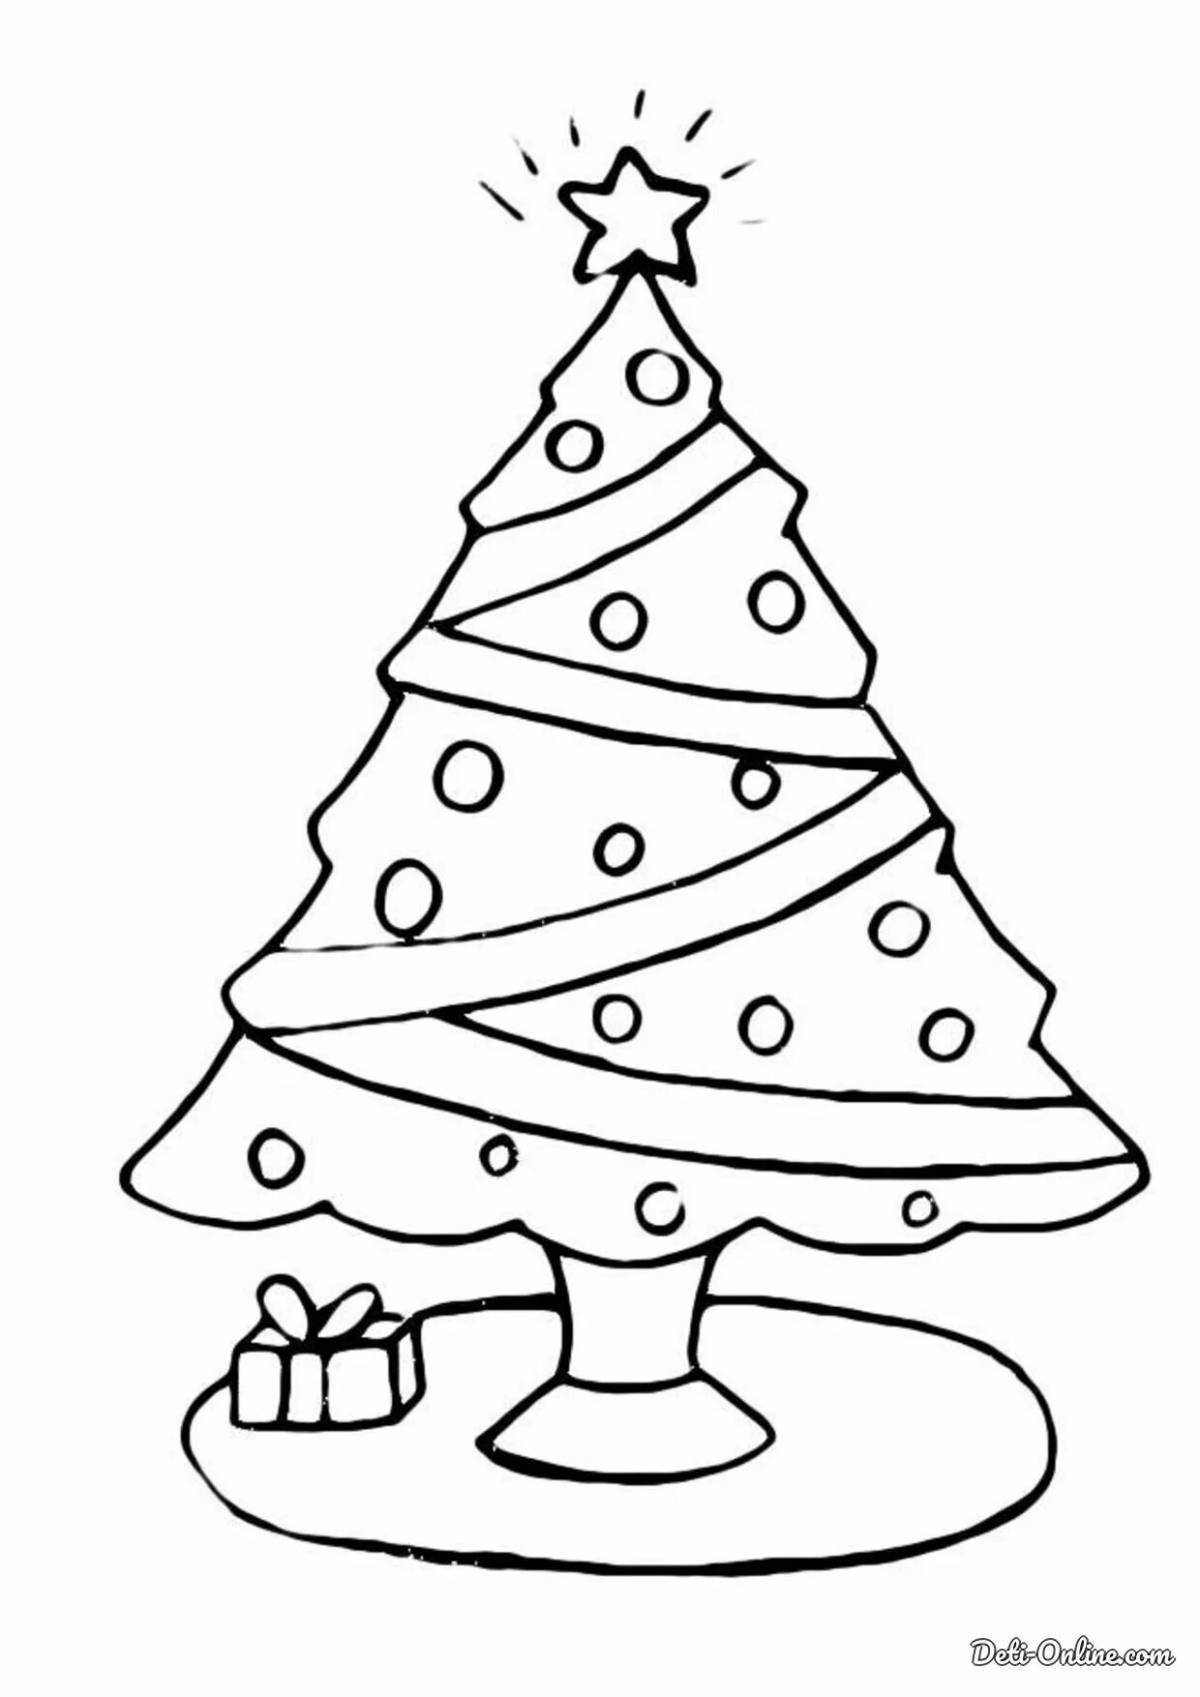 Little tree shiny coloring book